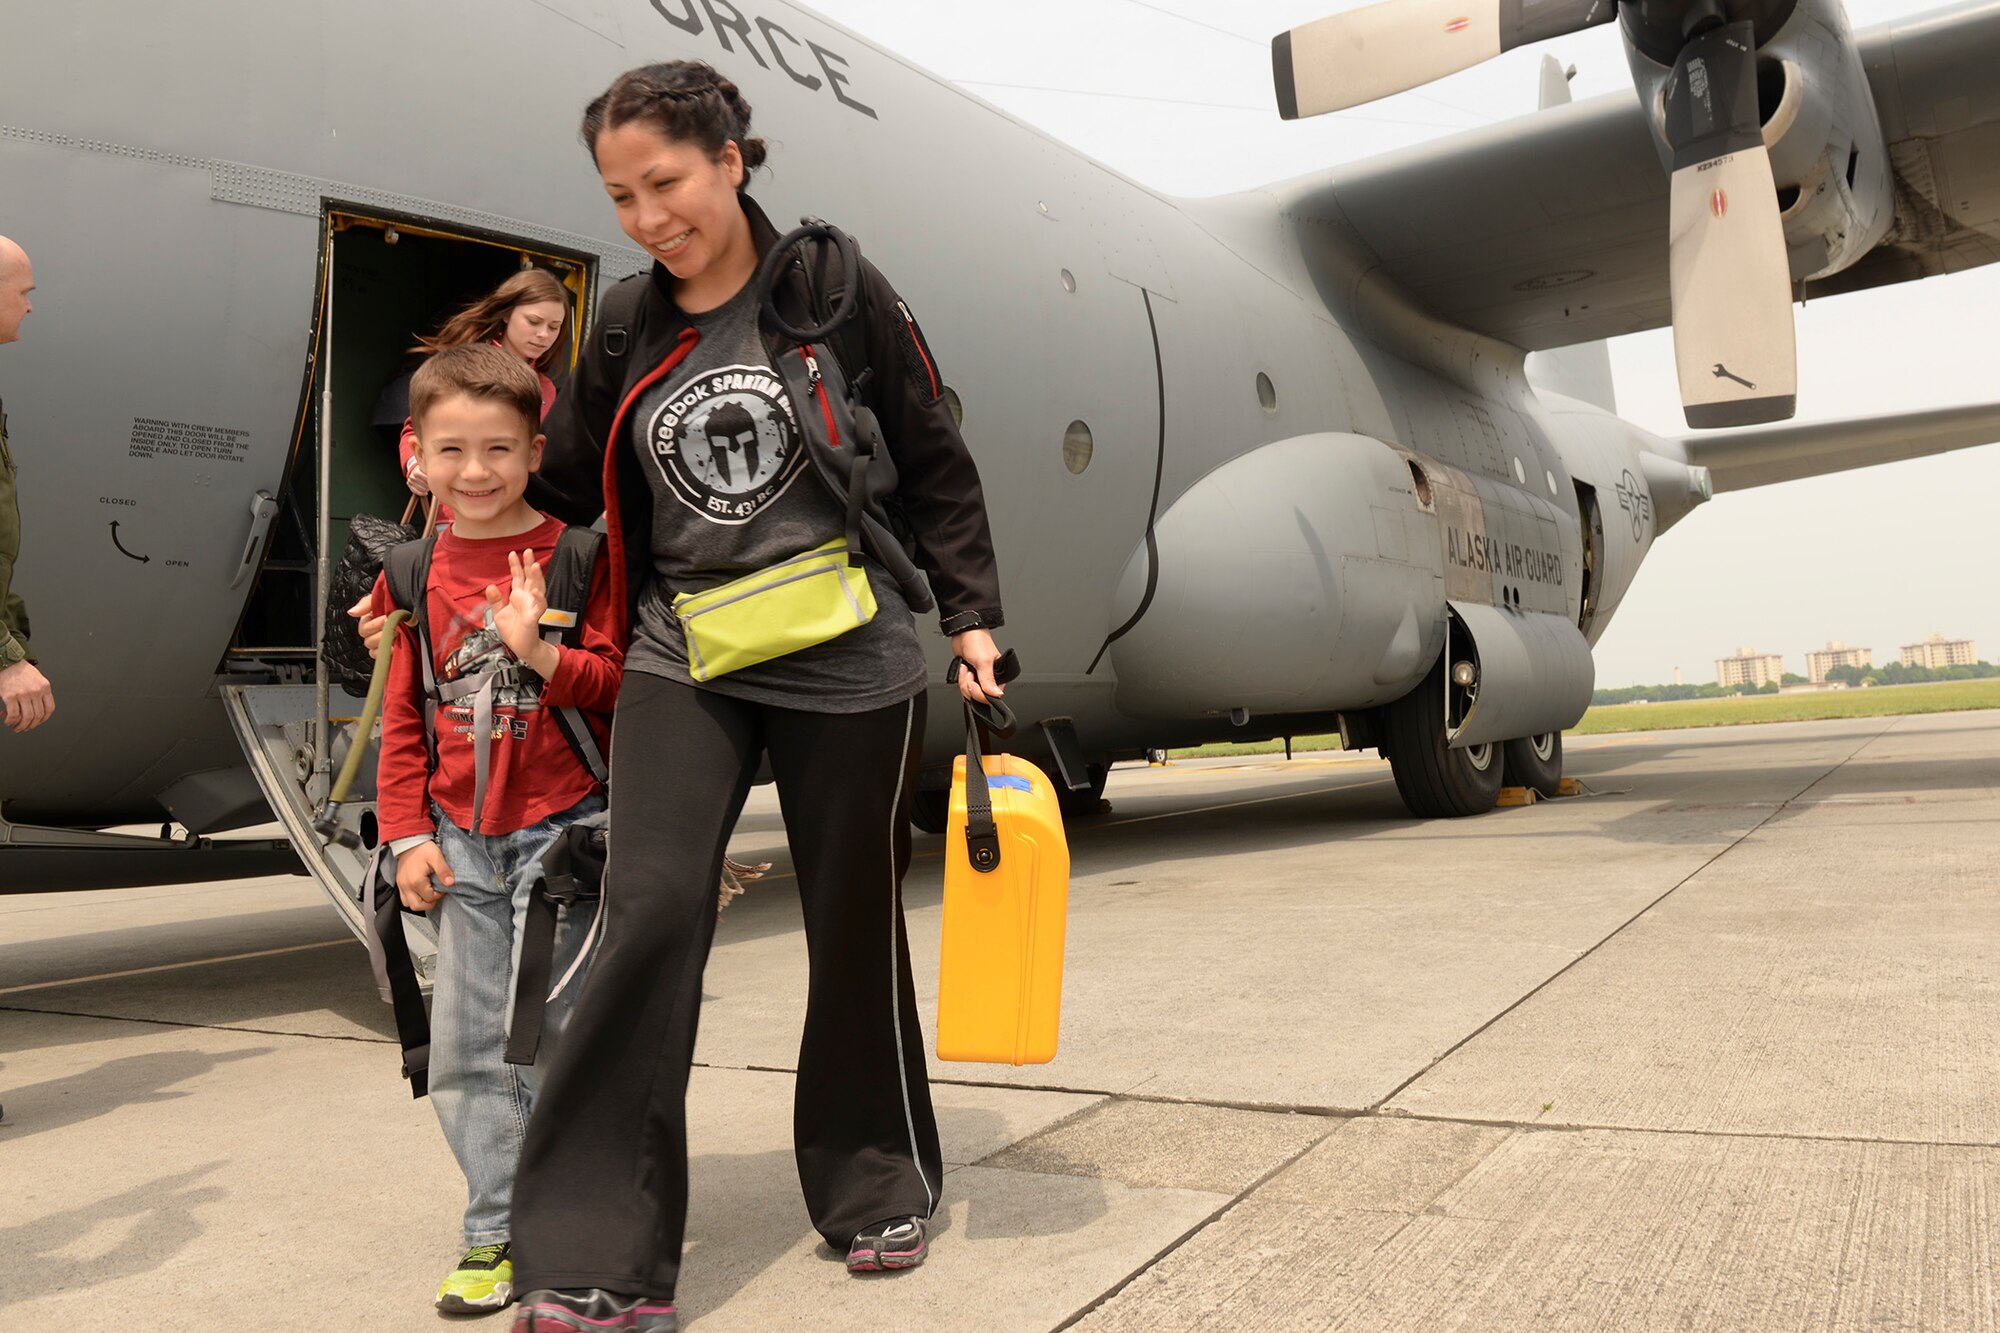 Military members and dependents living at Osan Air Base, Korea, arrive at Yokota Air Base, Japan, May 15, 2015. The dependents and military members went through the entire noncombatant evacuation process as part of a readiness inspection. (Airman 1st Class Elizabeth Baker/Released)